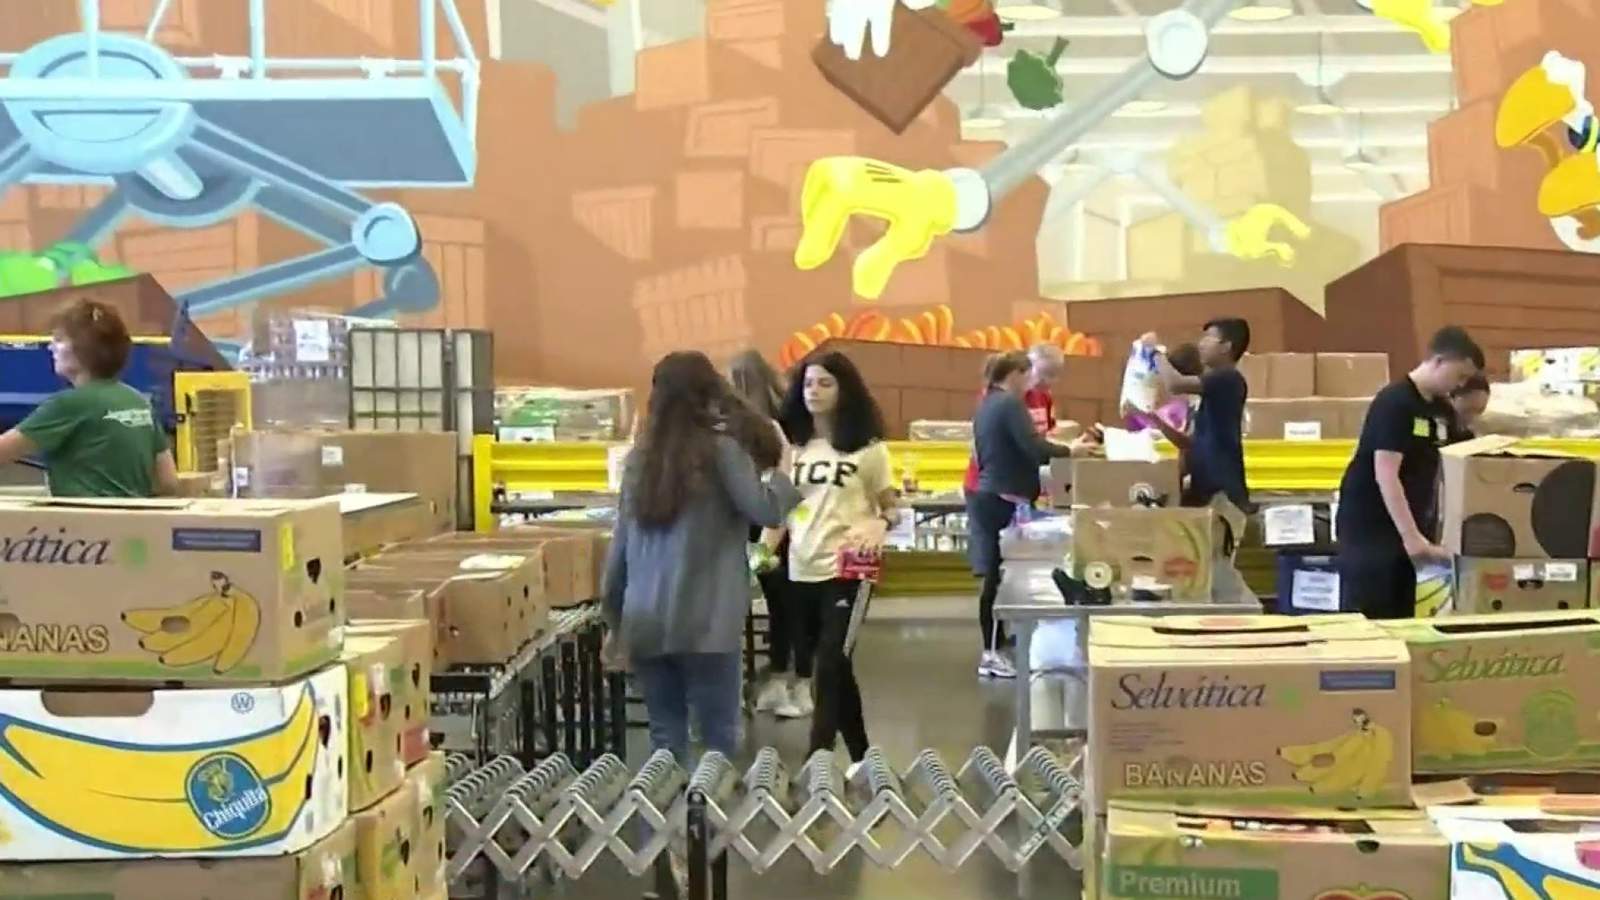 Second Harvest Food Bank prepares to distribute more meals after donation from Disney